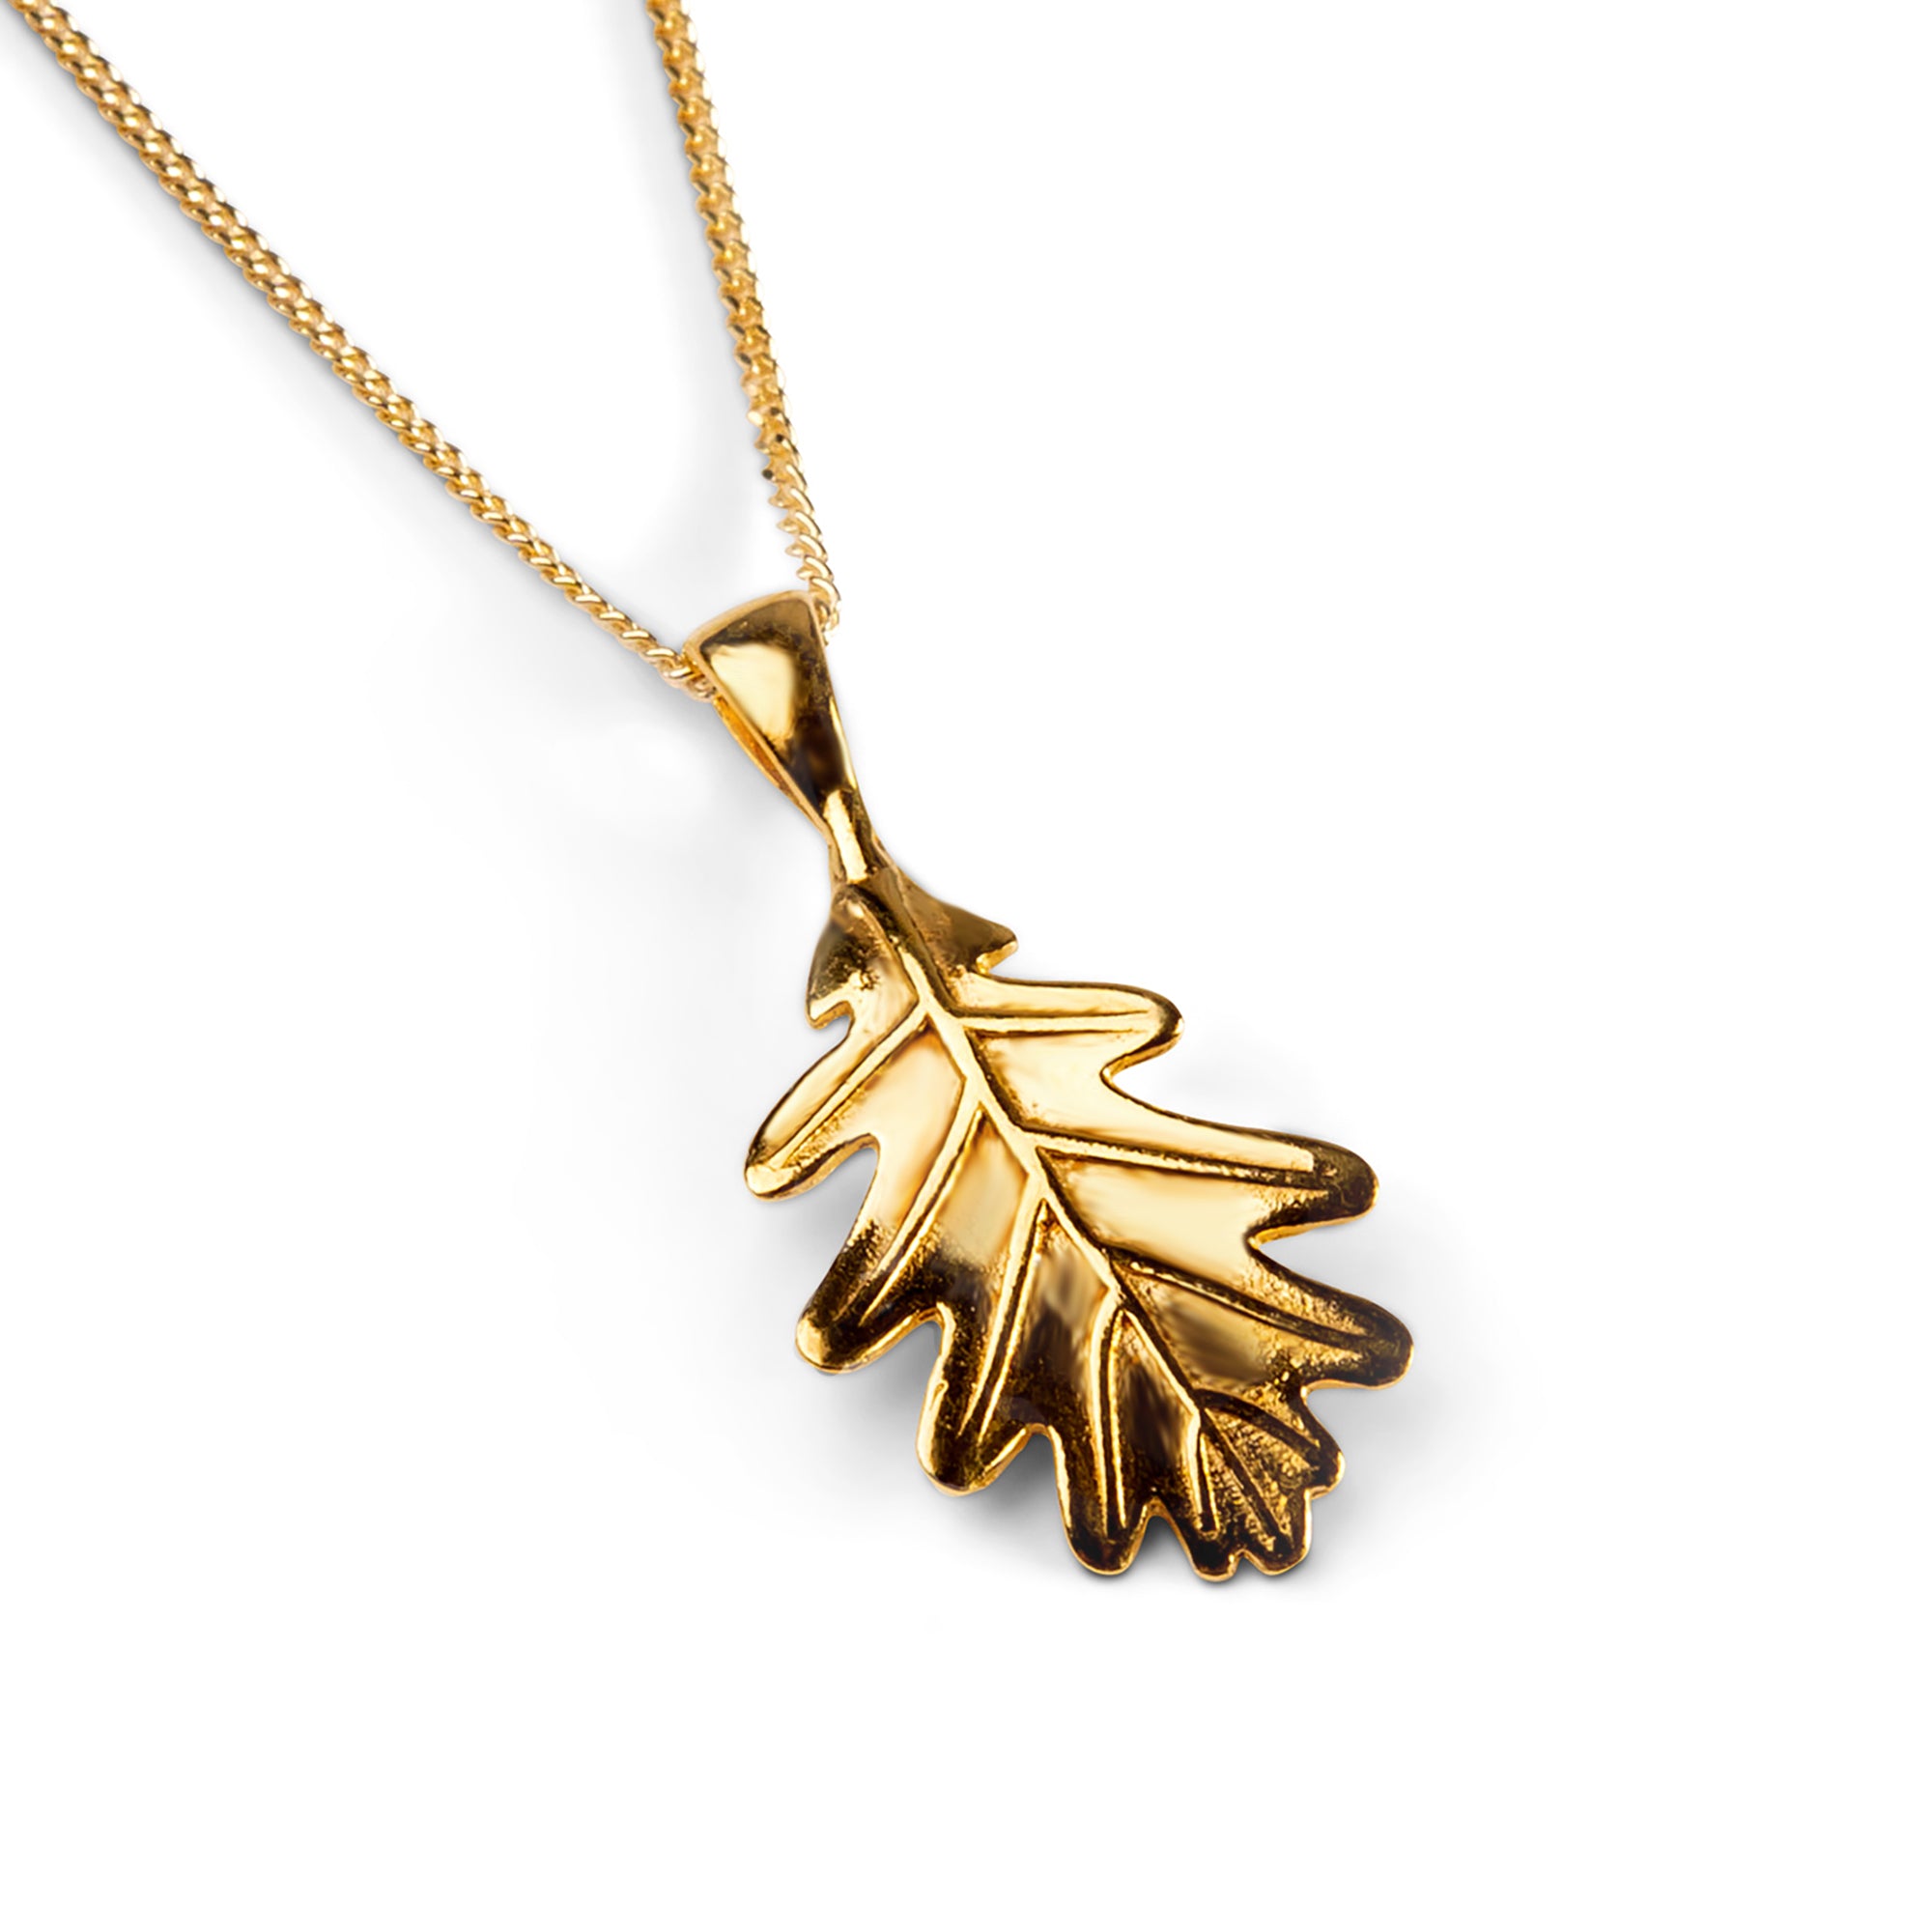 Embossed Leaf Design Dual-Layered Gold-Plated Necklace – Priyaasi